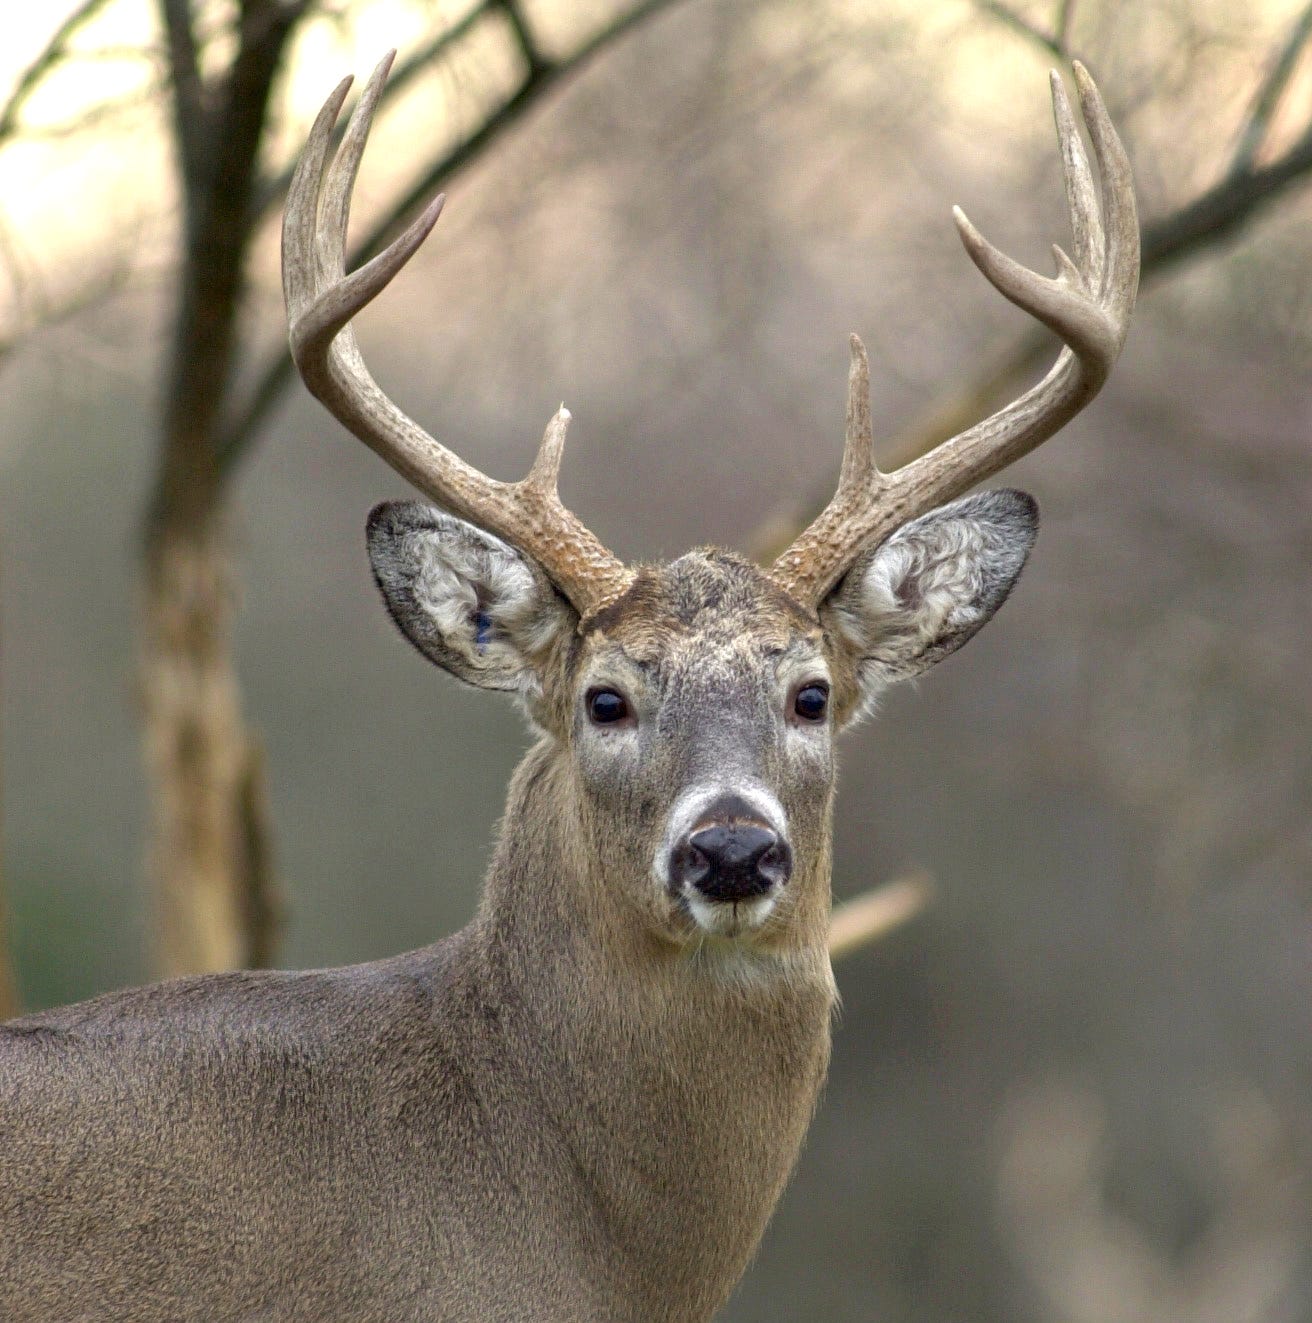 White-tailed deer hunting season begins in Ohio on Sept. 24 and will end on Feb. 5, 2023.